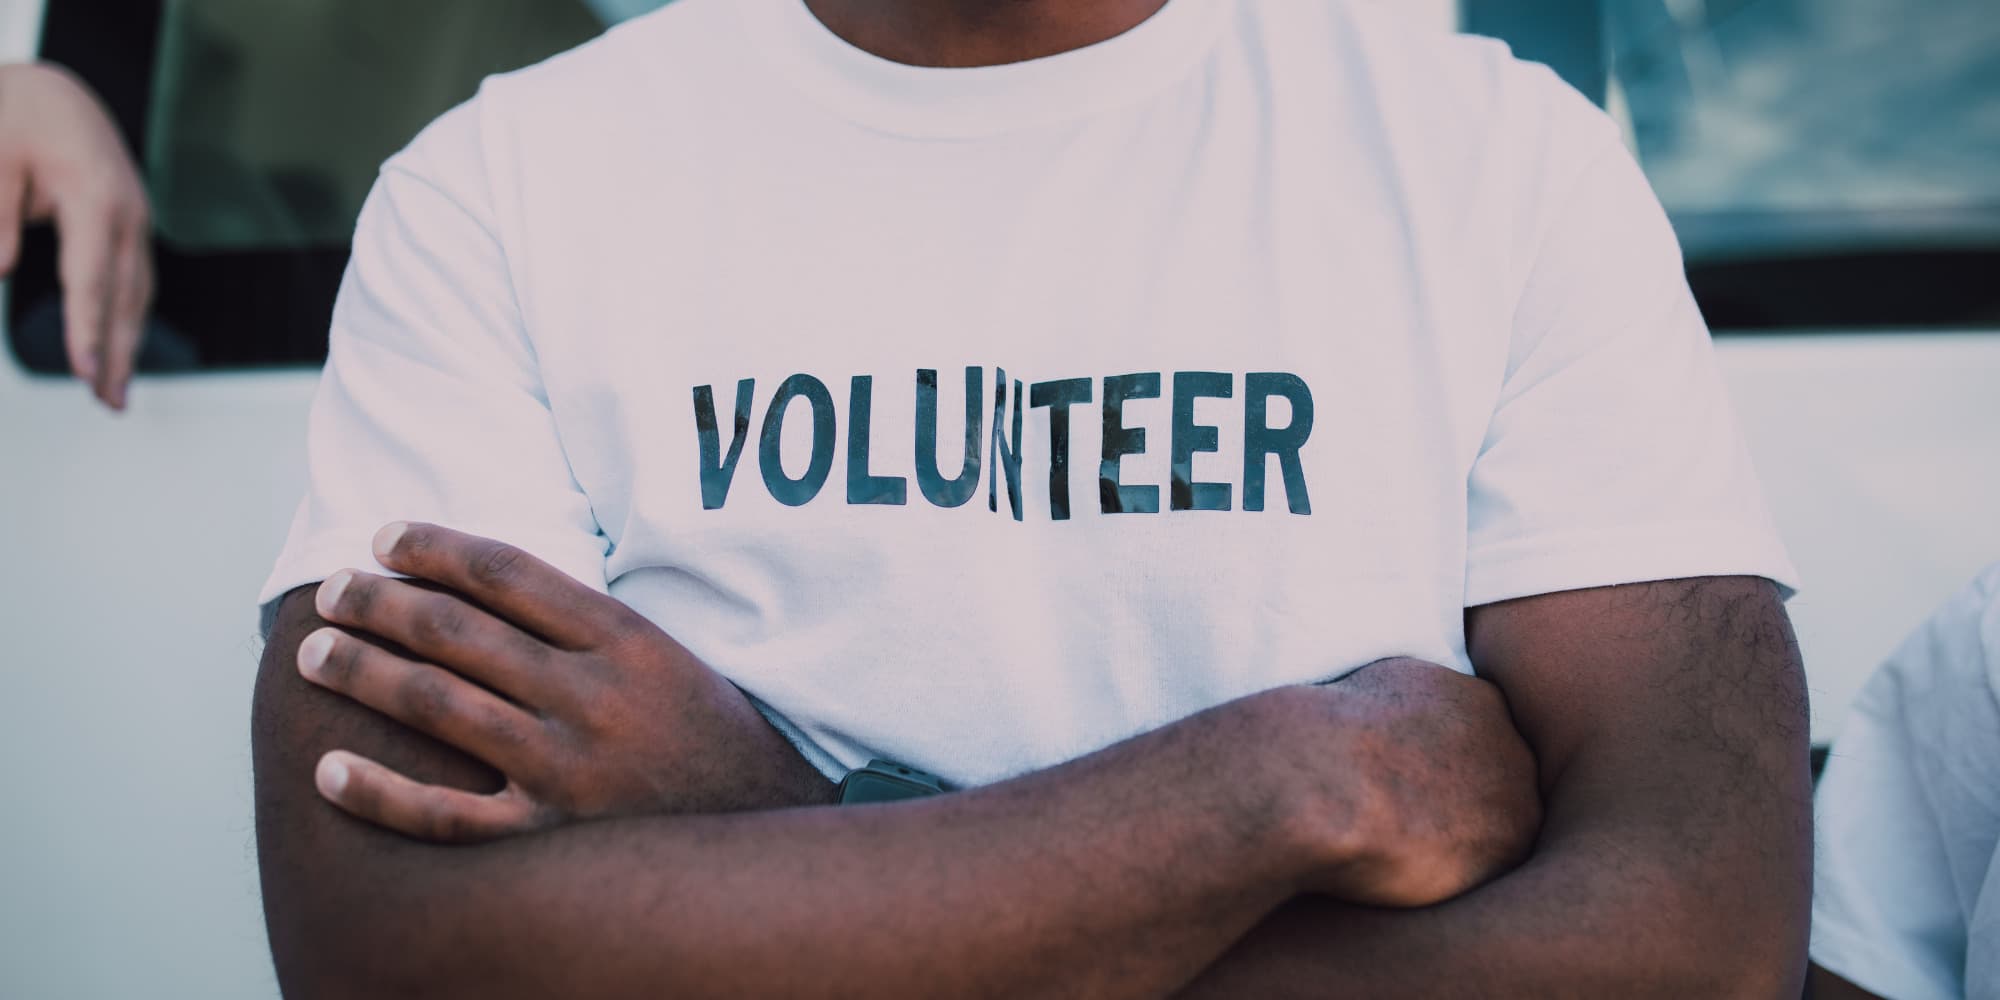 A close up of a male volunteer crossing his arms with his t-shirt focused in on the word "Volunteer" printed on it.